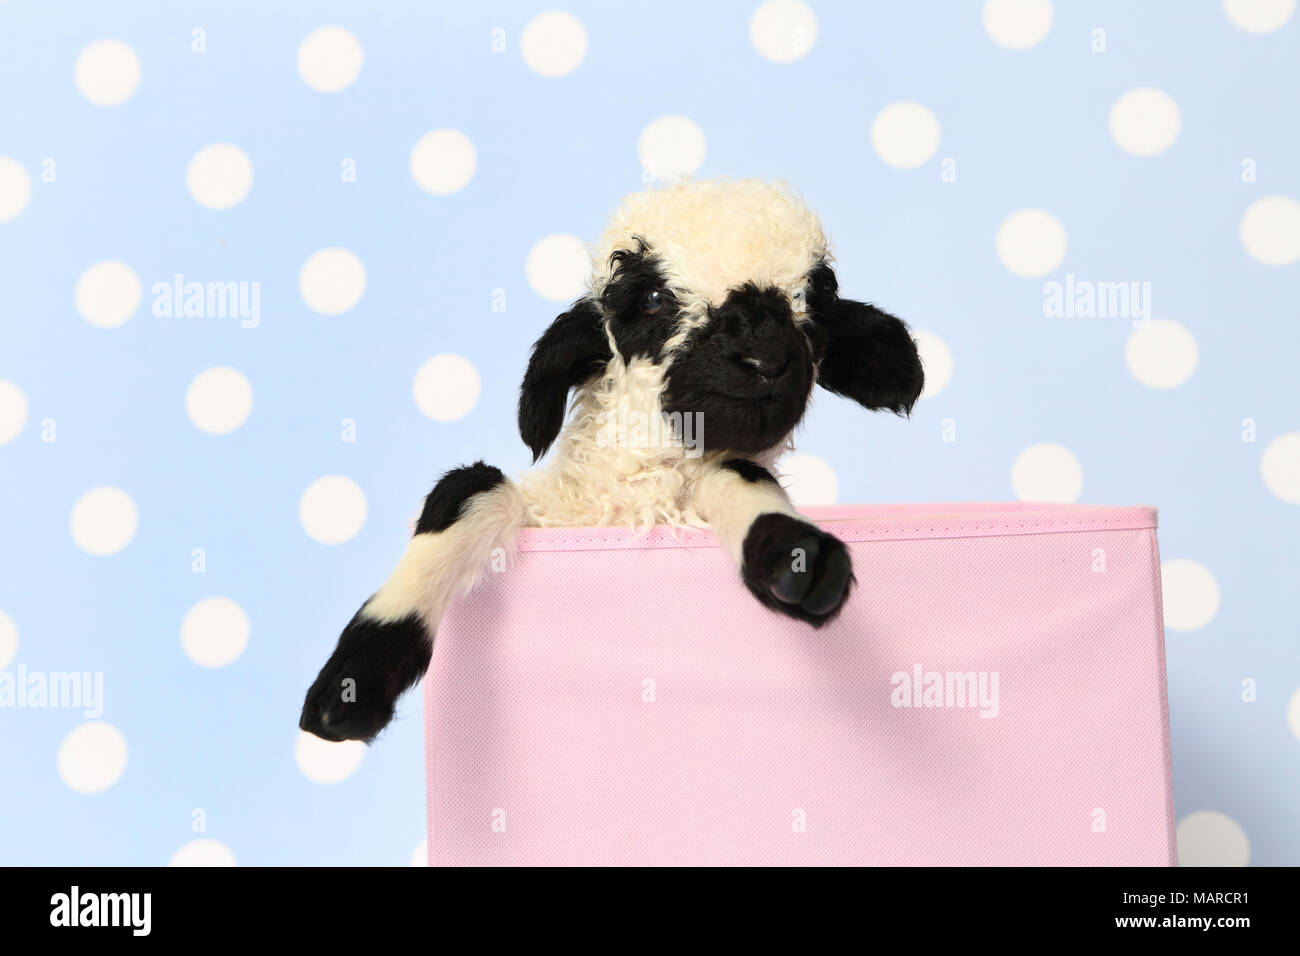 Valais Blacknose Sheep. Lamb (10 days old) in a pink box. Studio picture against a light-blue background with polka dots. Germany Stock Photo